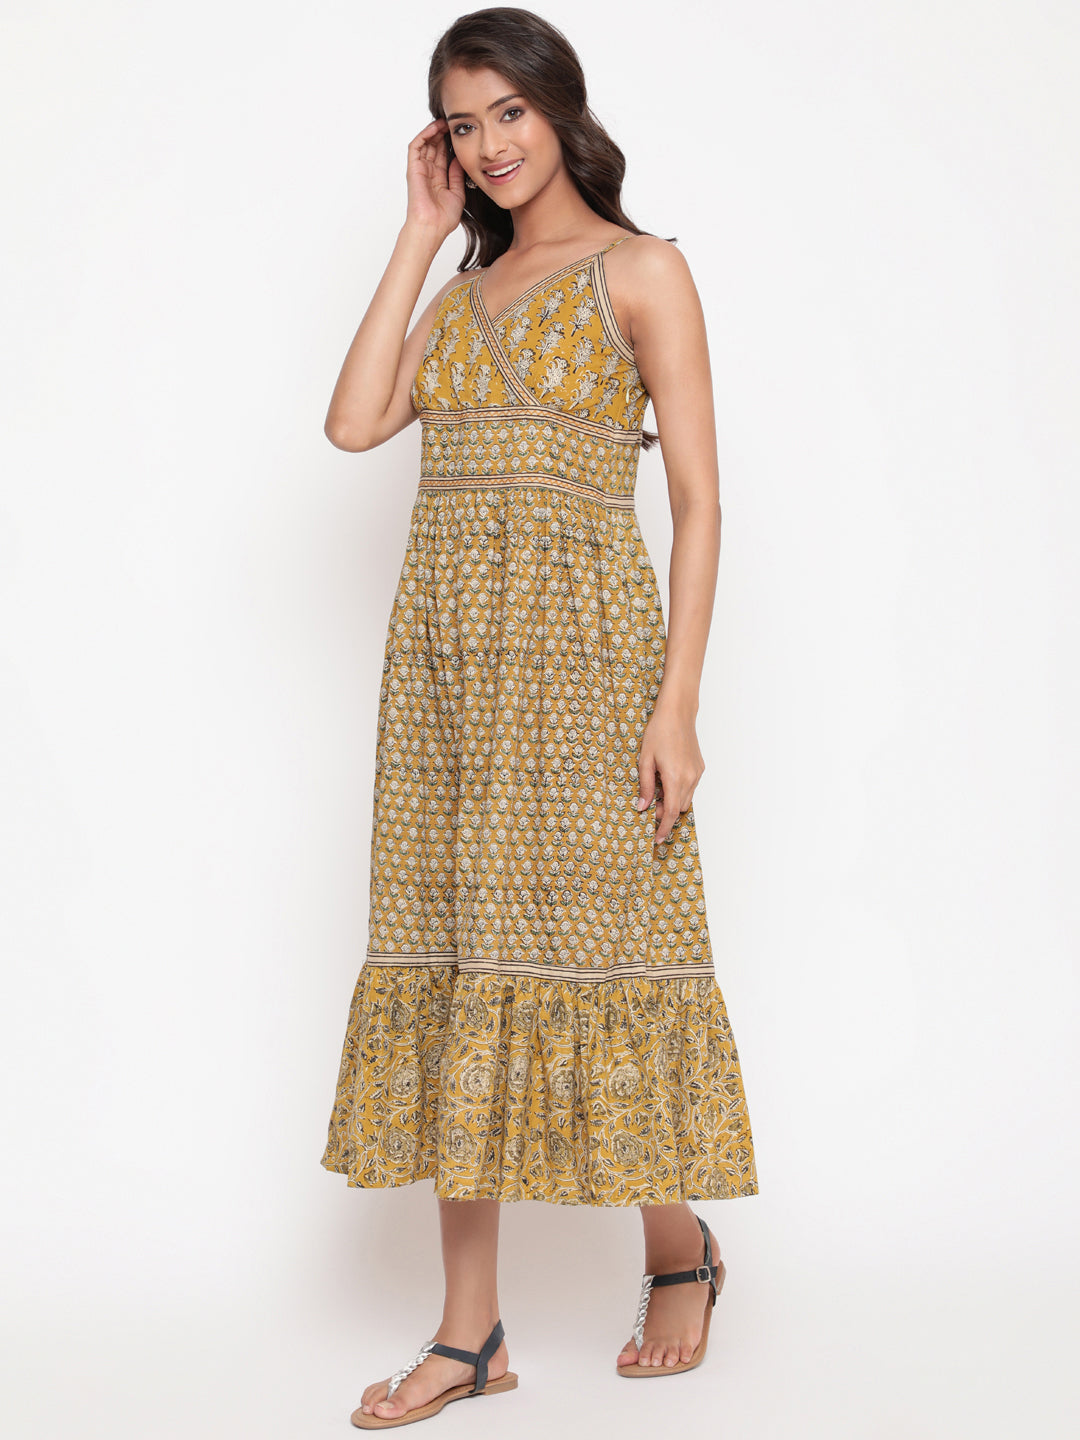 Woman posing in Savi's Cotton hand block inspired printed strappy mustard flared dress